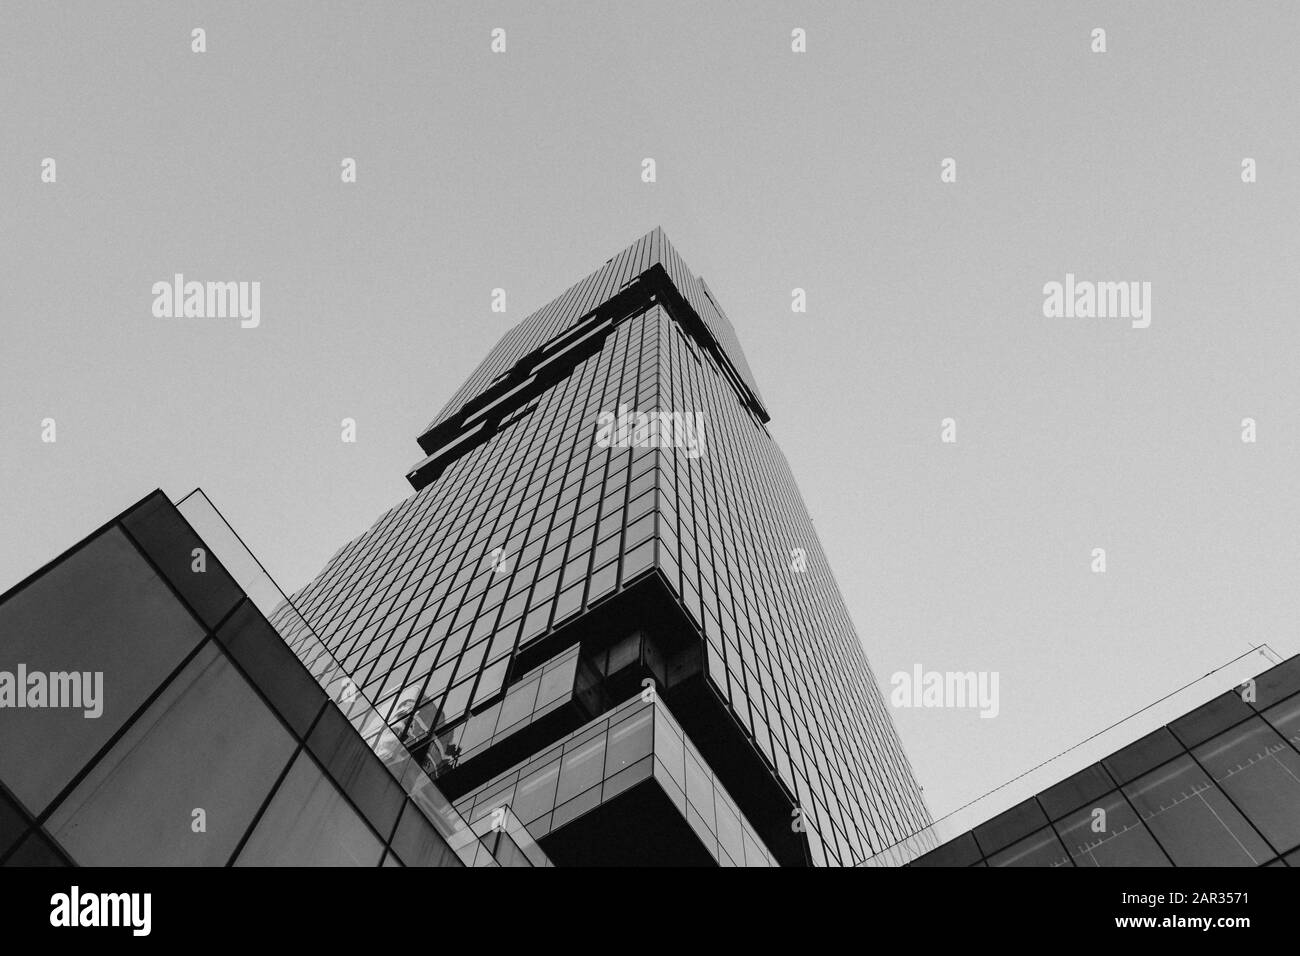 Black and white tone, Low angle view of King power Mahanakhon, modern mix use tower designed by Ole Scheeren the highest skyscraper in Bangkok. Stock Photo